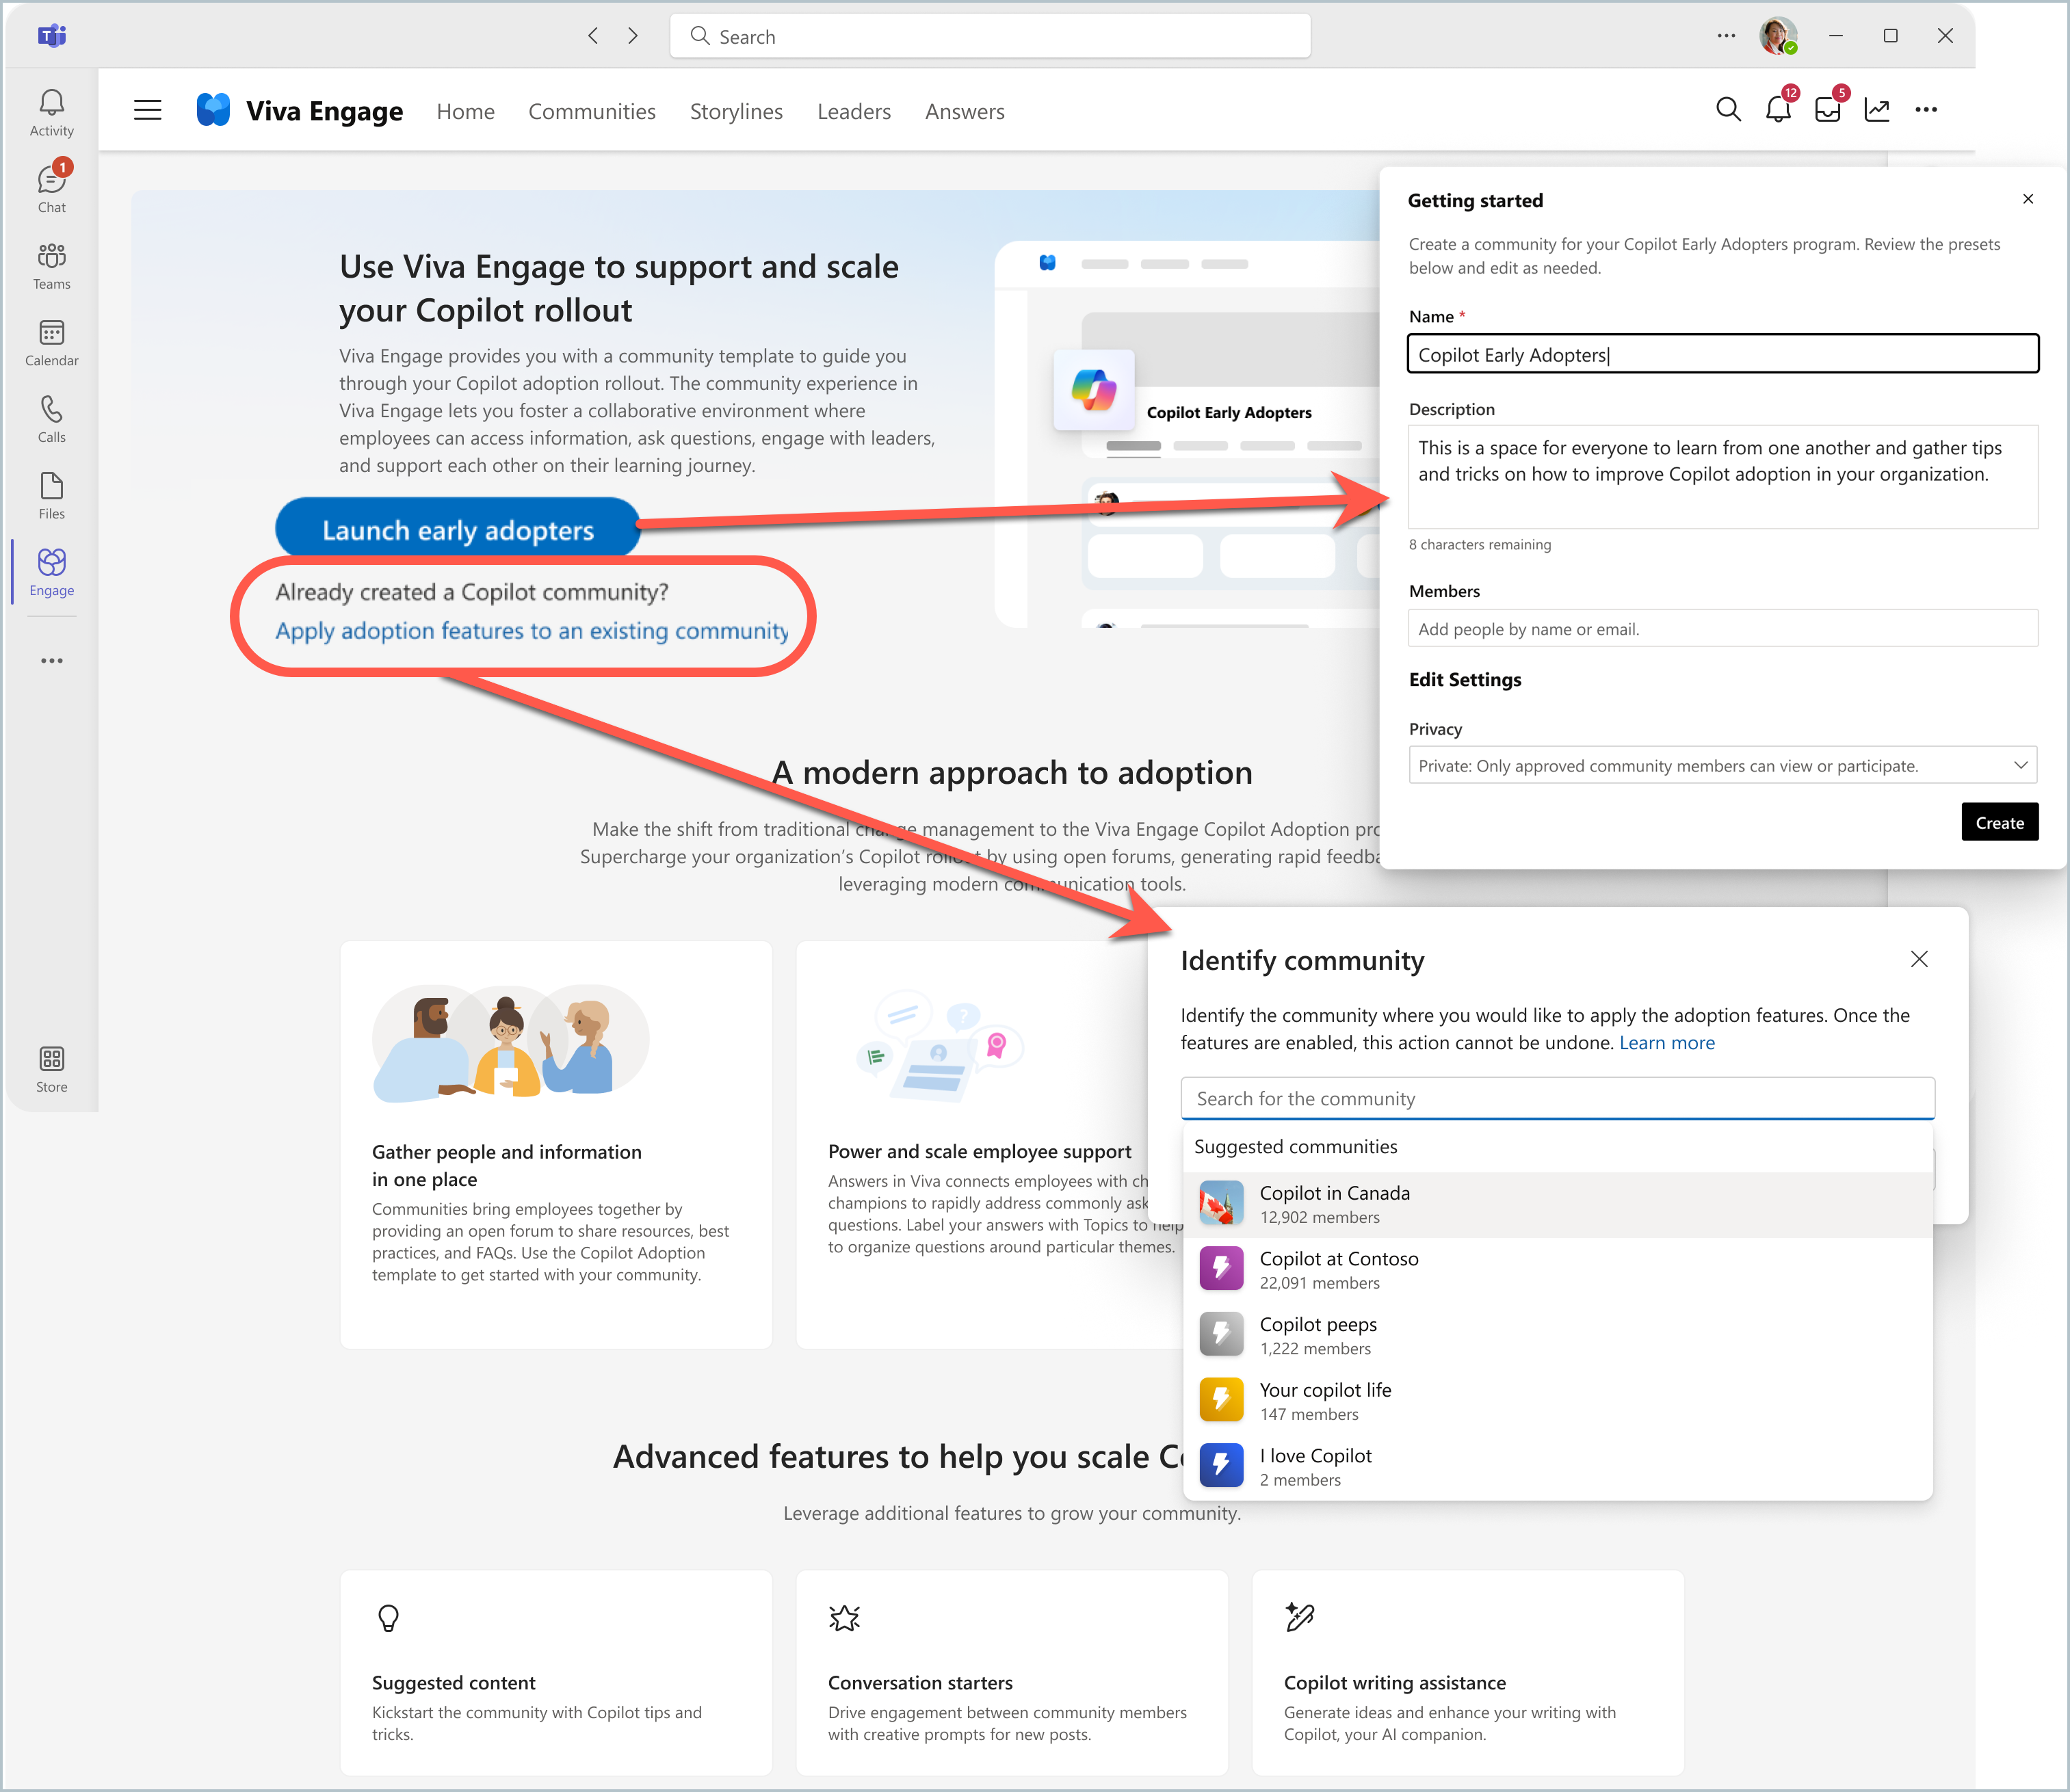 Screenshot shows the landing page where you can create a Microsoft 365 Copilot adoption community or bring Copilot adoption features to an existing community.